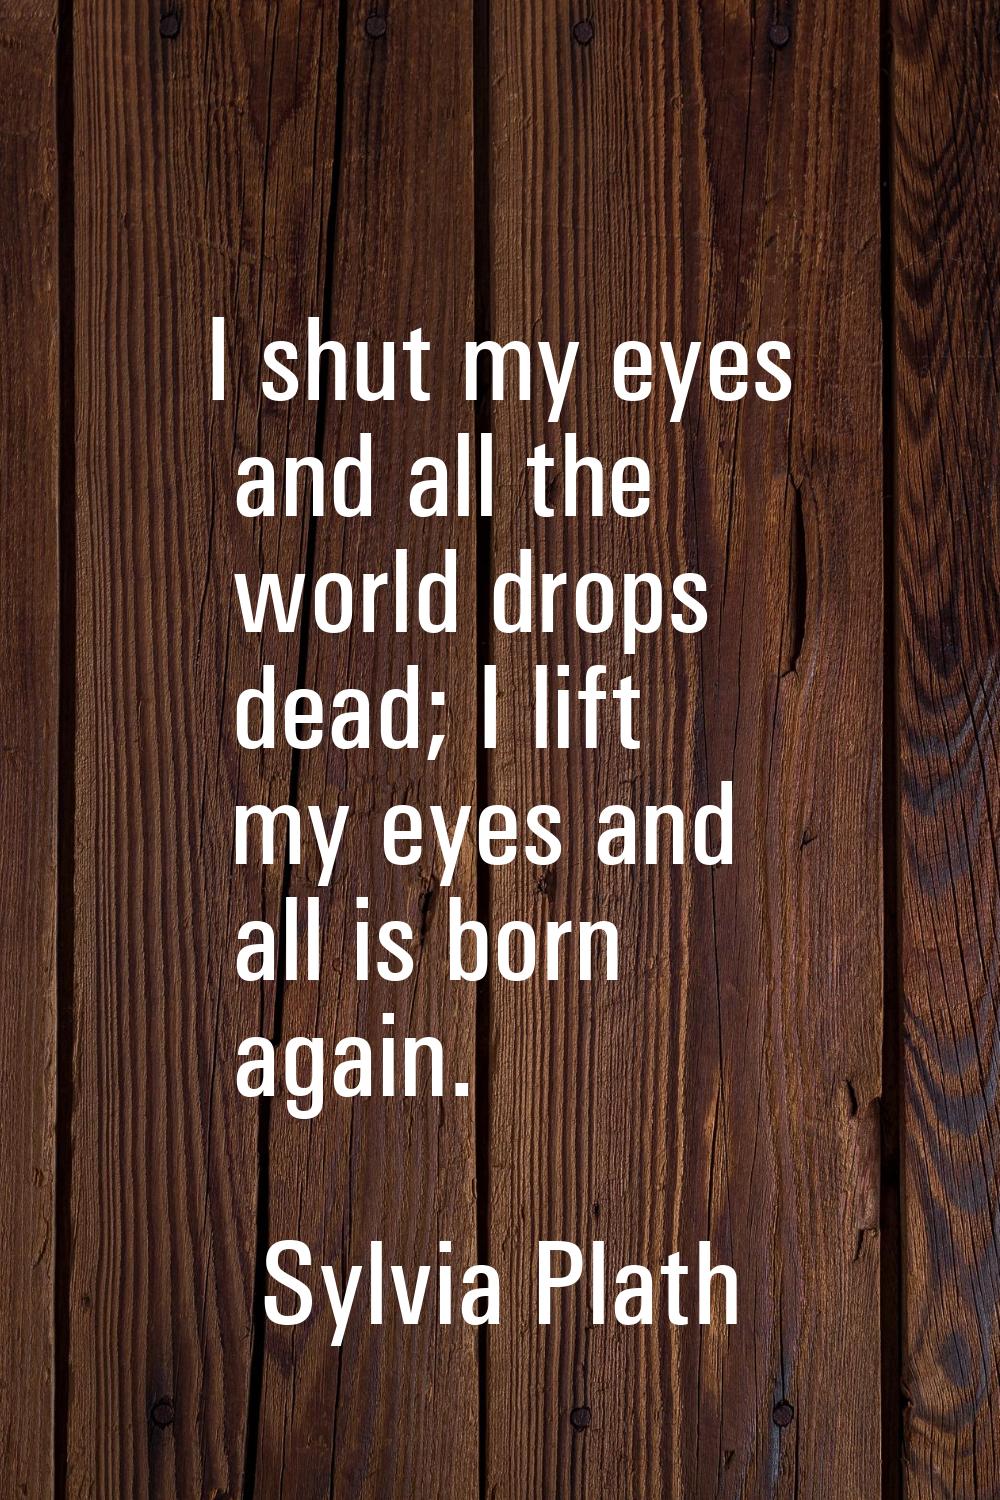 I shut my eyes and all the world drops dead; I lift my eyes and all is born again.